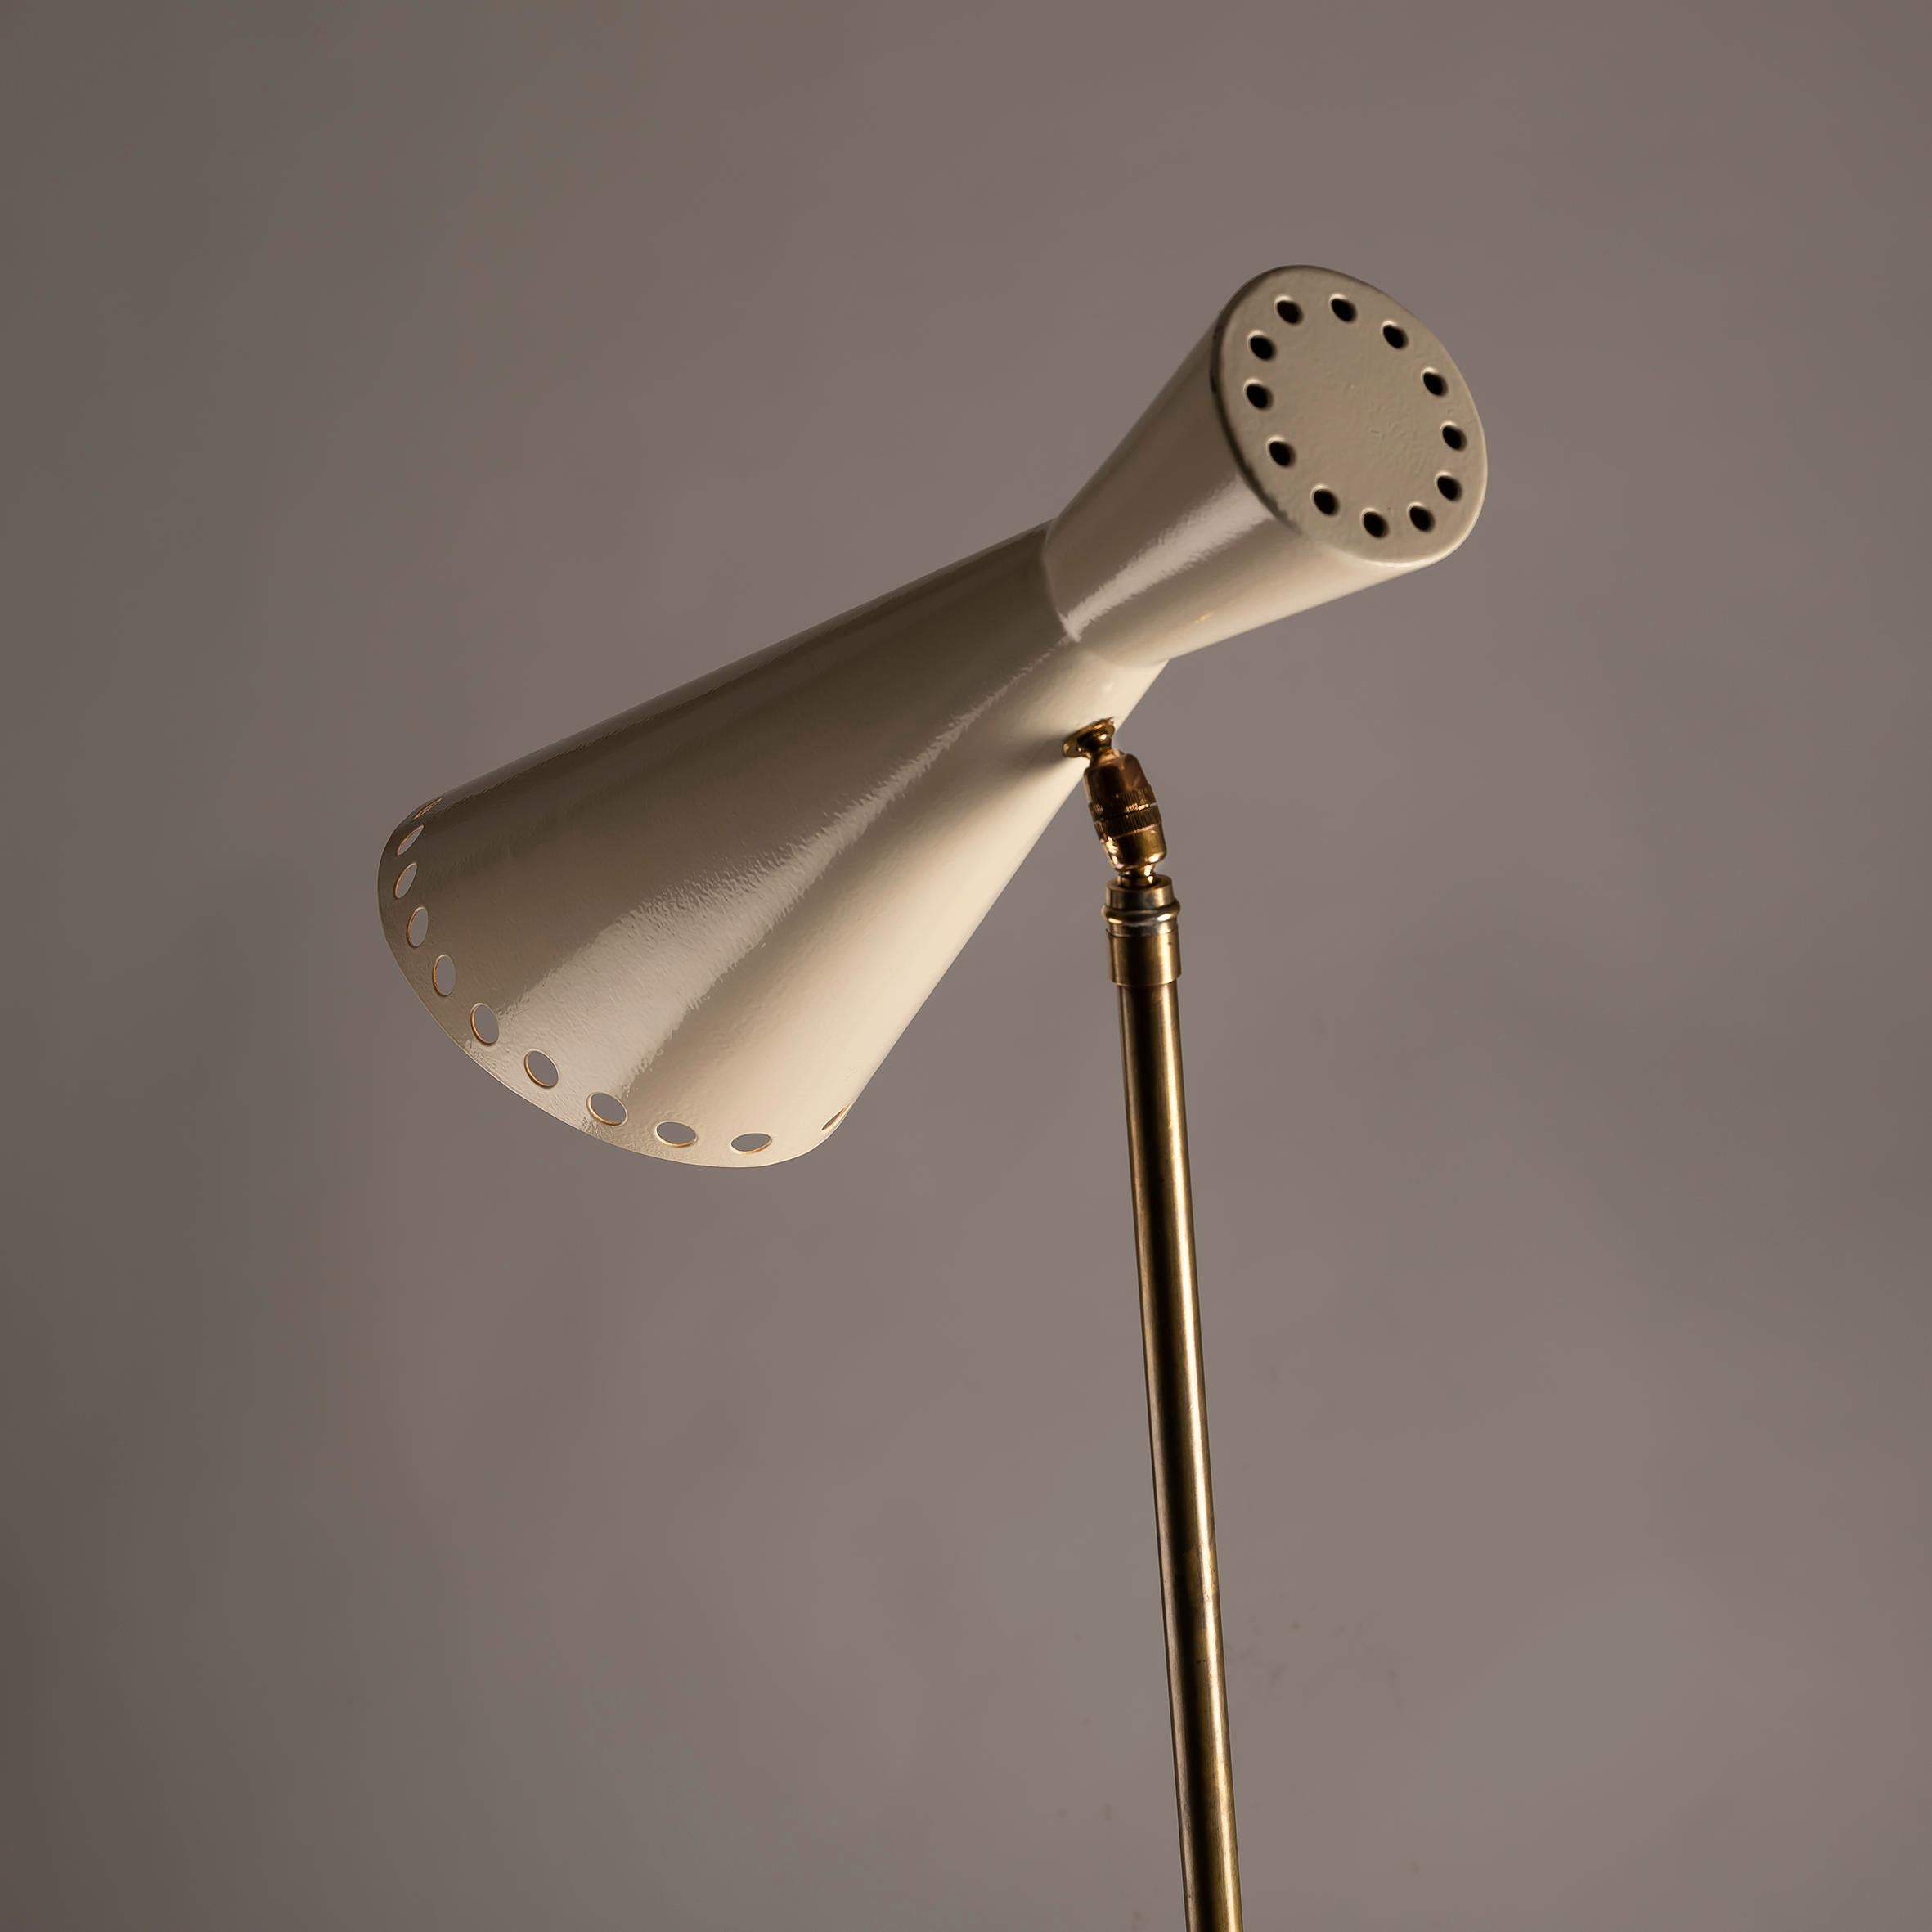 An Italian Diabolo floor Lamp in Brass and Metal Lacquered, 1950s For Sale 1